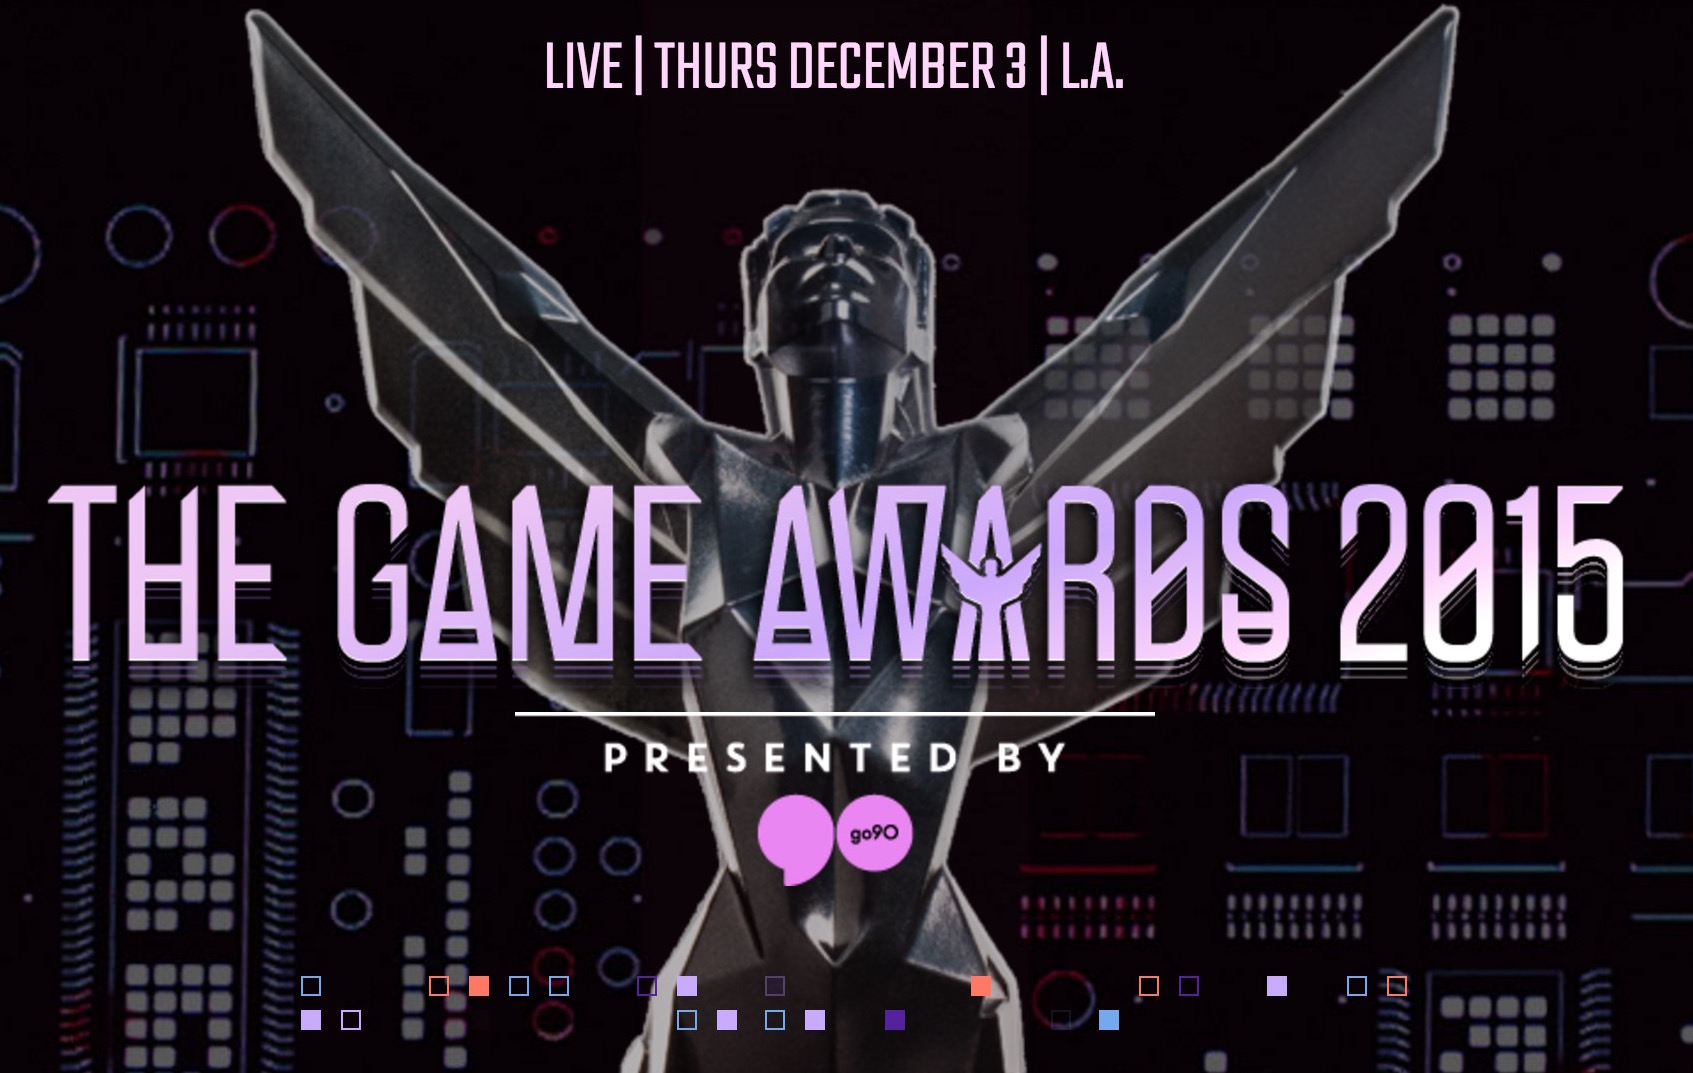 The Game Awards 2015: svelate le nomination